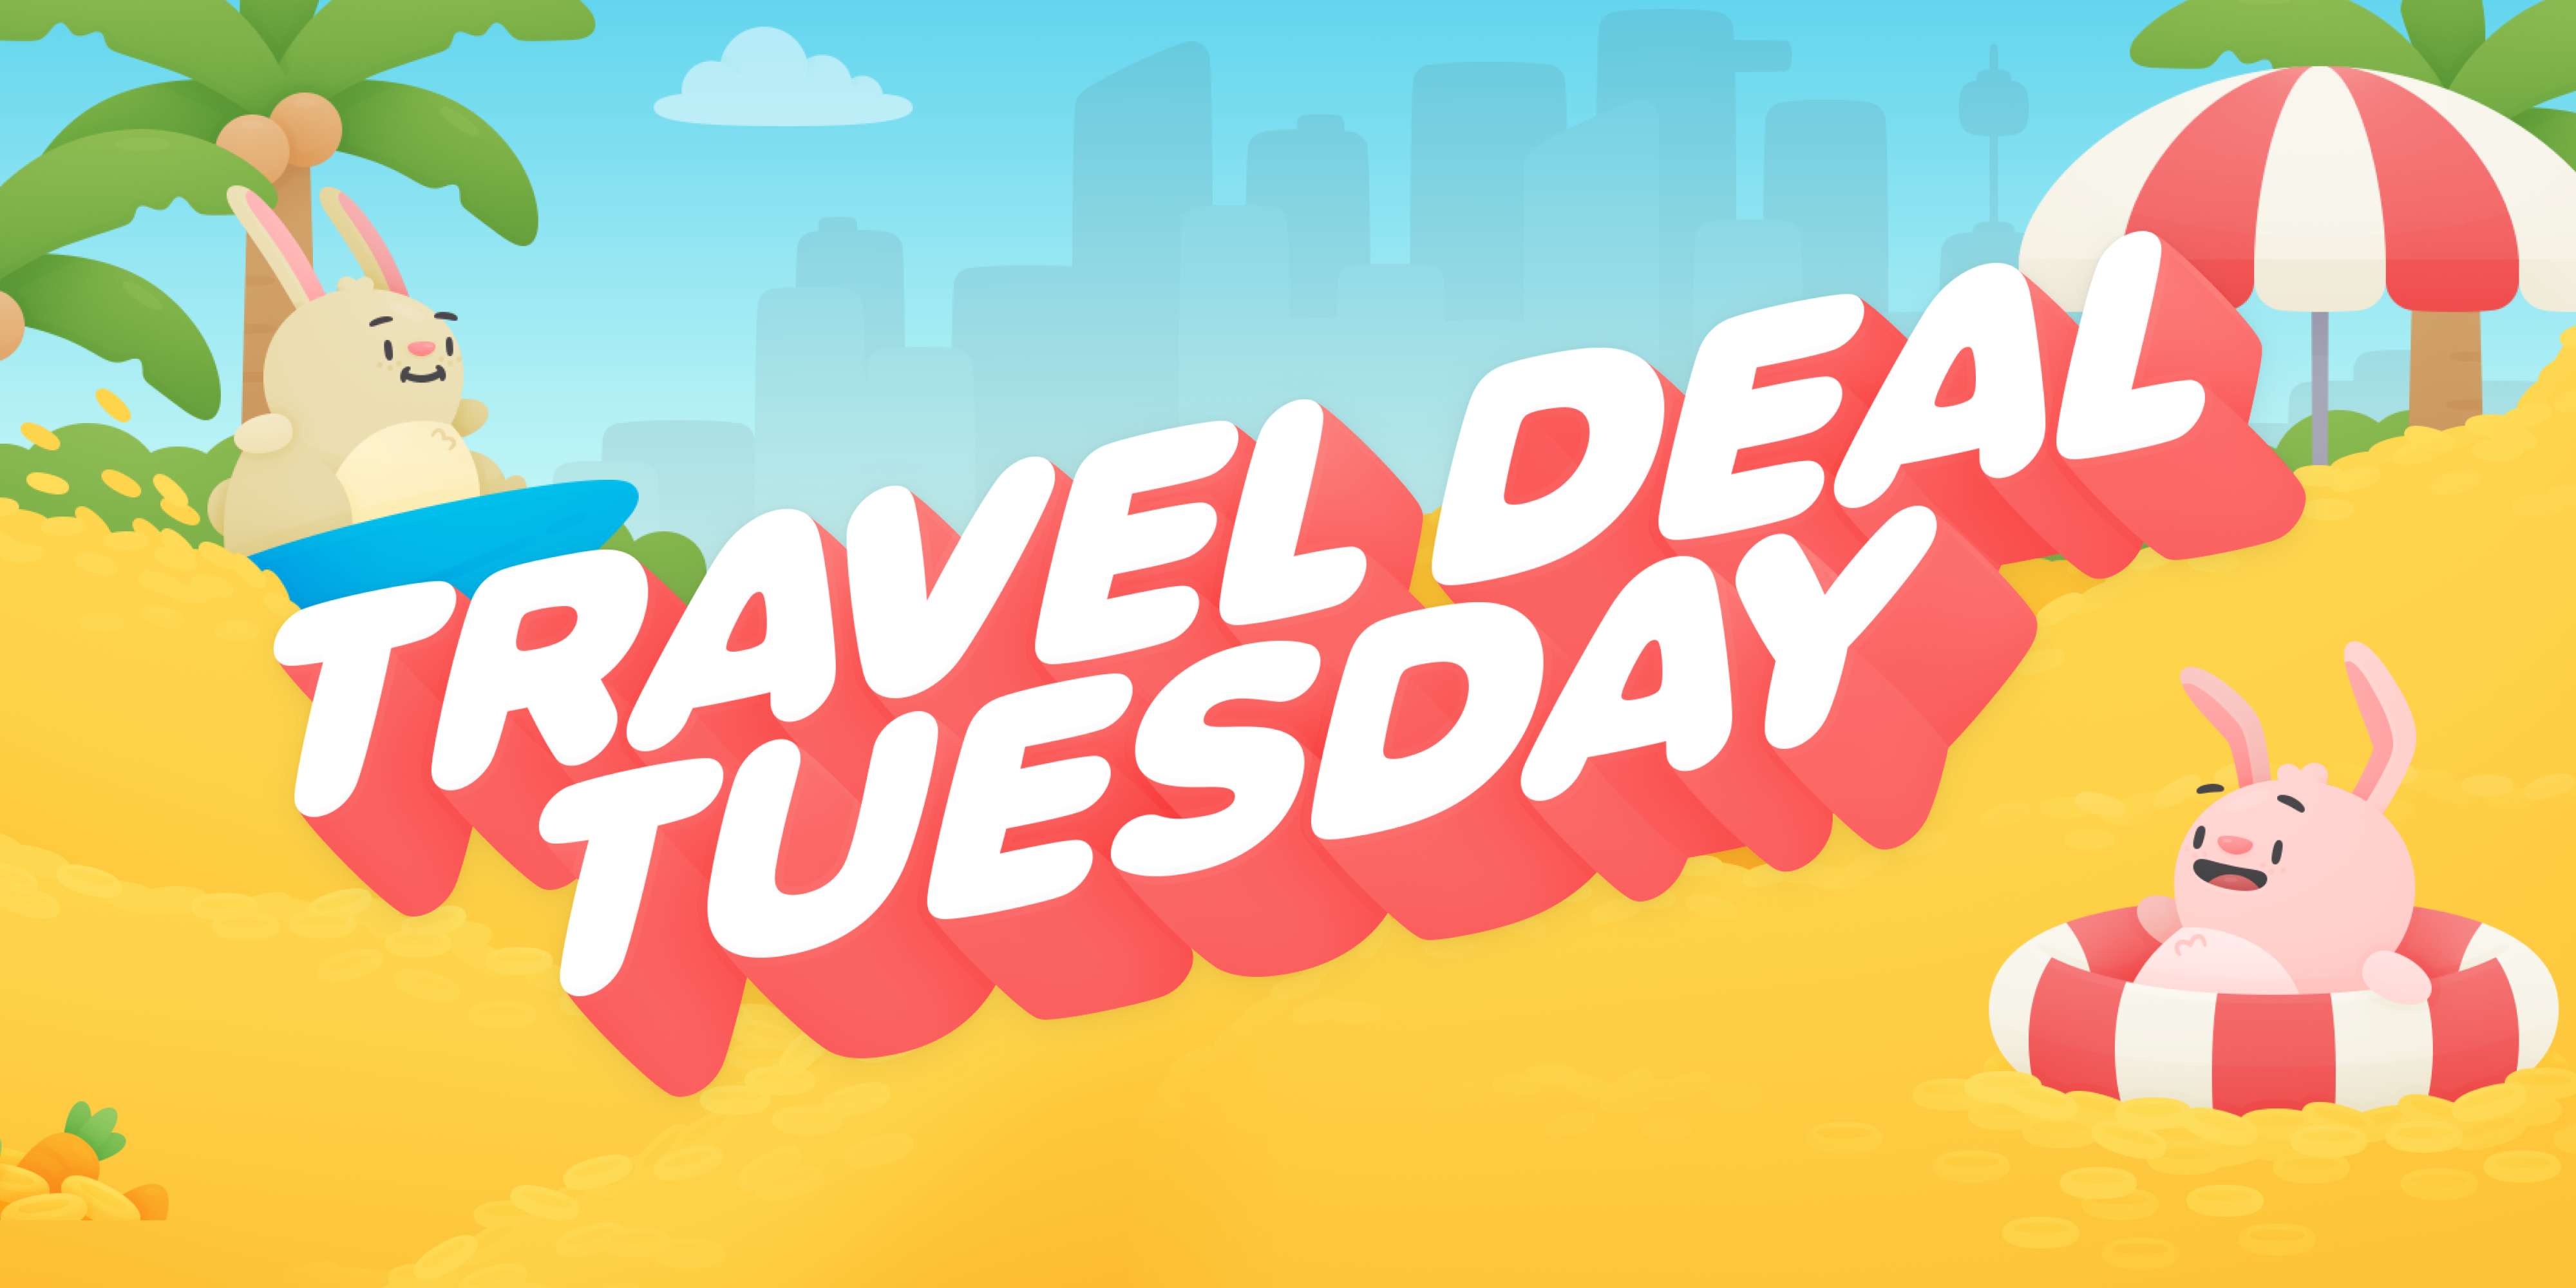 Travel Deal Tuesday Returns With The Best Travel Deals of the